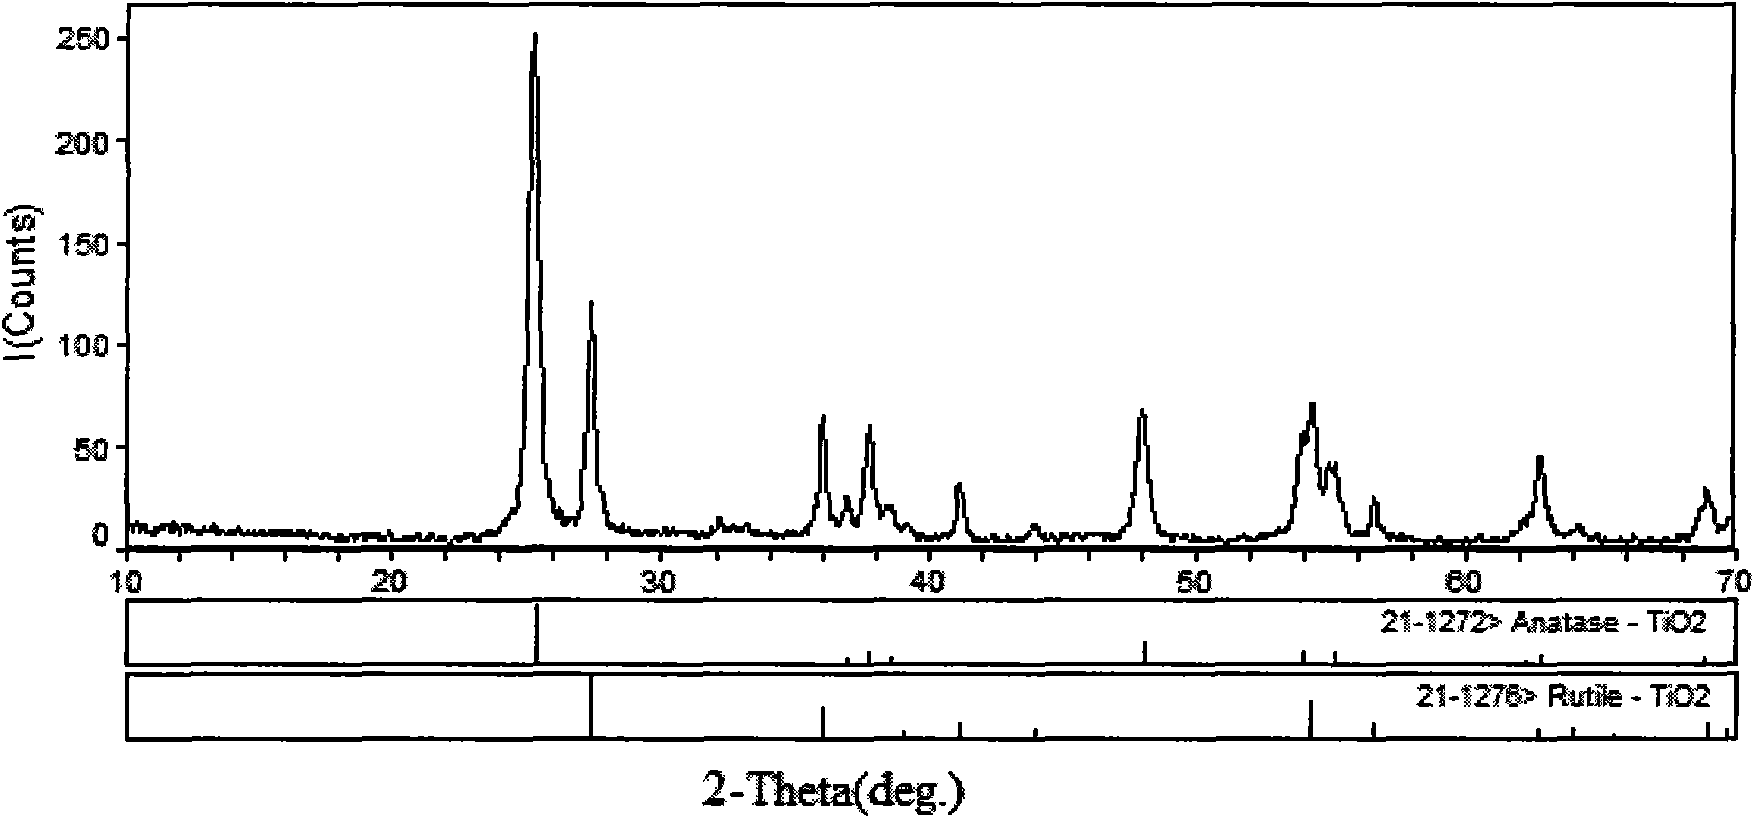 Preparation method for titanium dioxide photocatalyst doped with metal ion